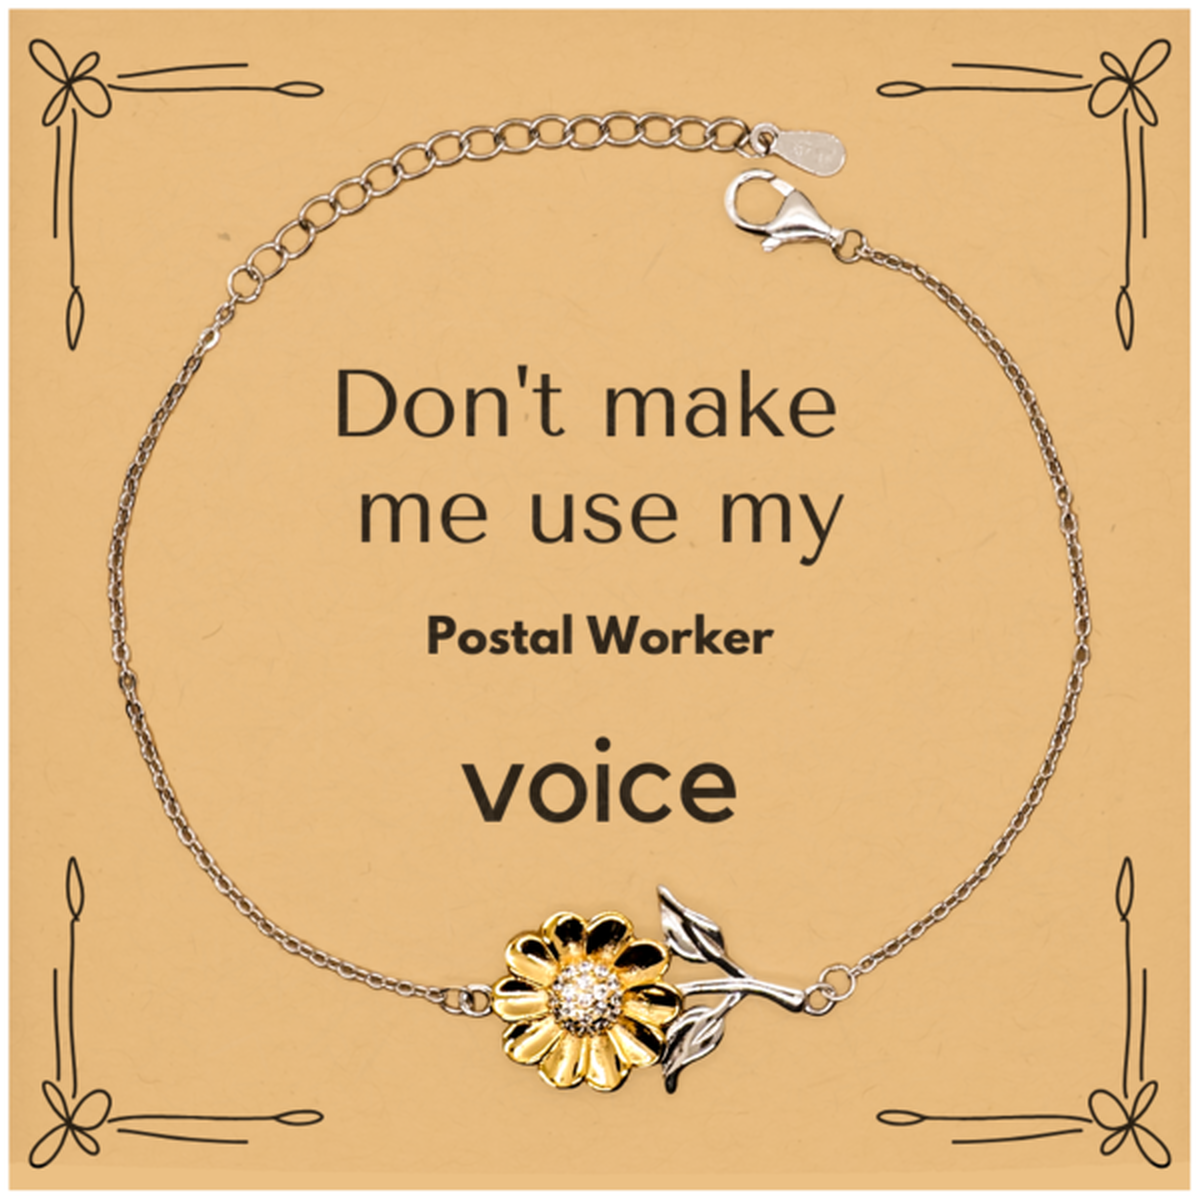 Don't make me use my Postal Worker voice, Sarcasm Postal Worker Card Gifts, Christmas Postal Worker Sunflower Bracelet Birthday Unique Gifts For Postal Worker Coworkers, Men, Women, Colleague, Friends